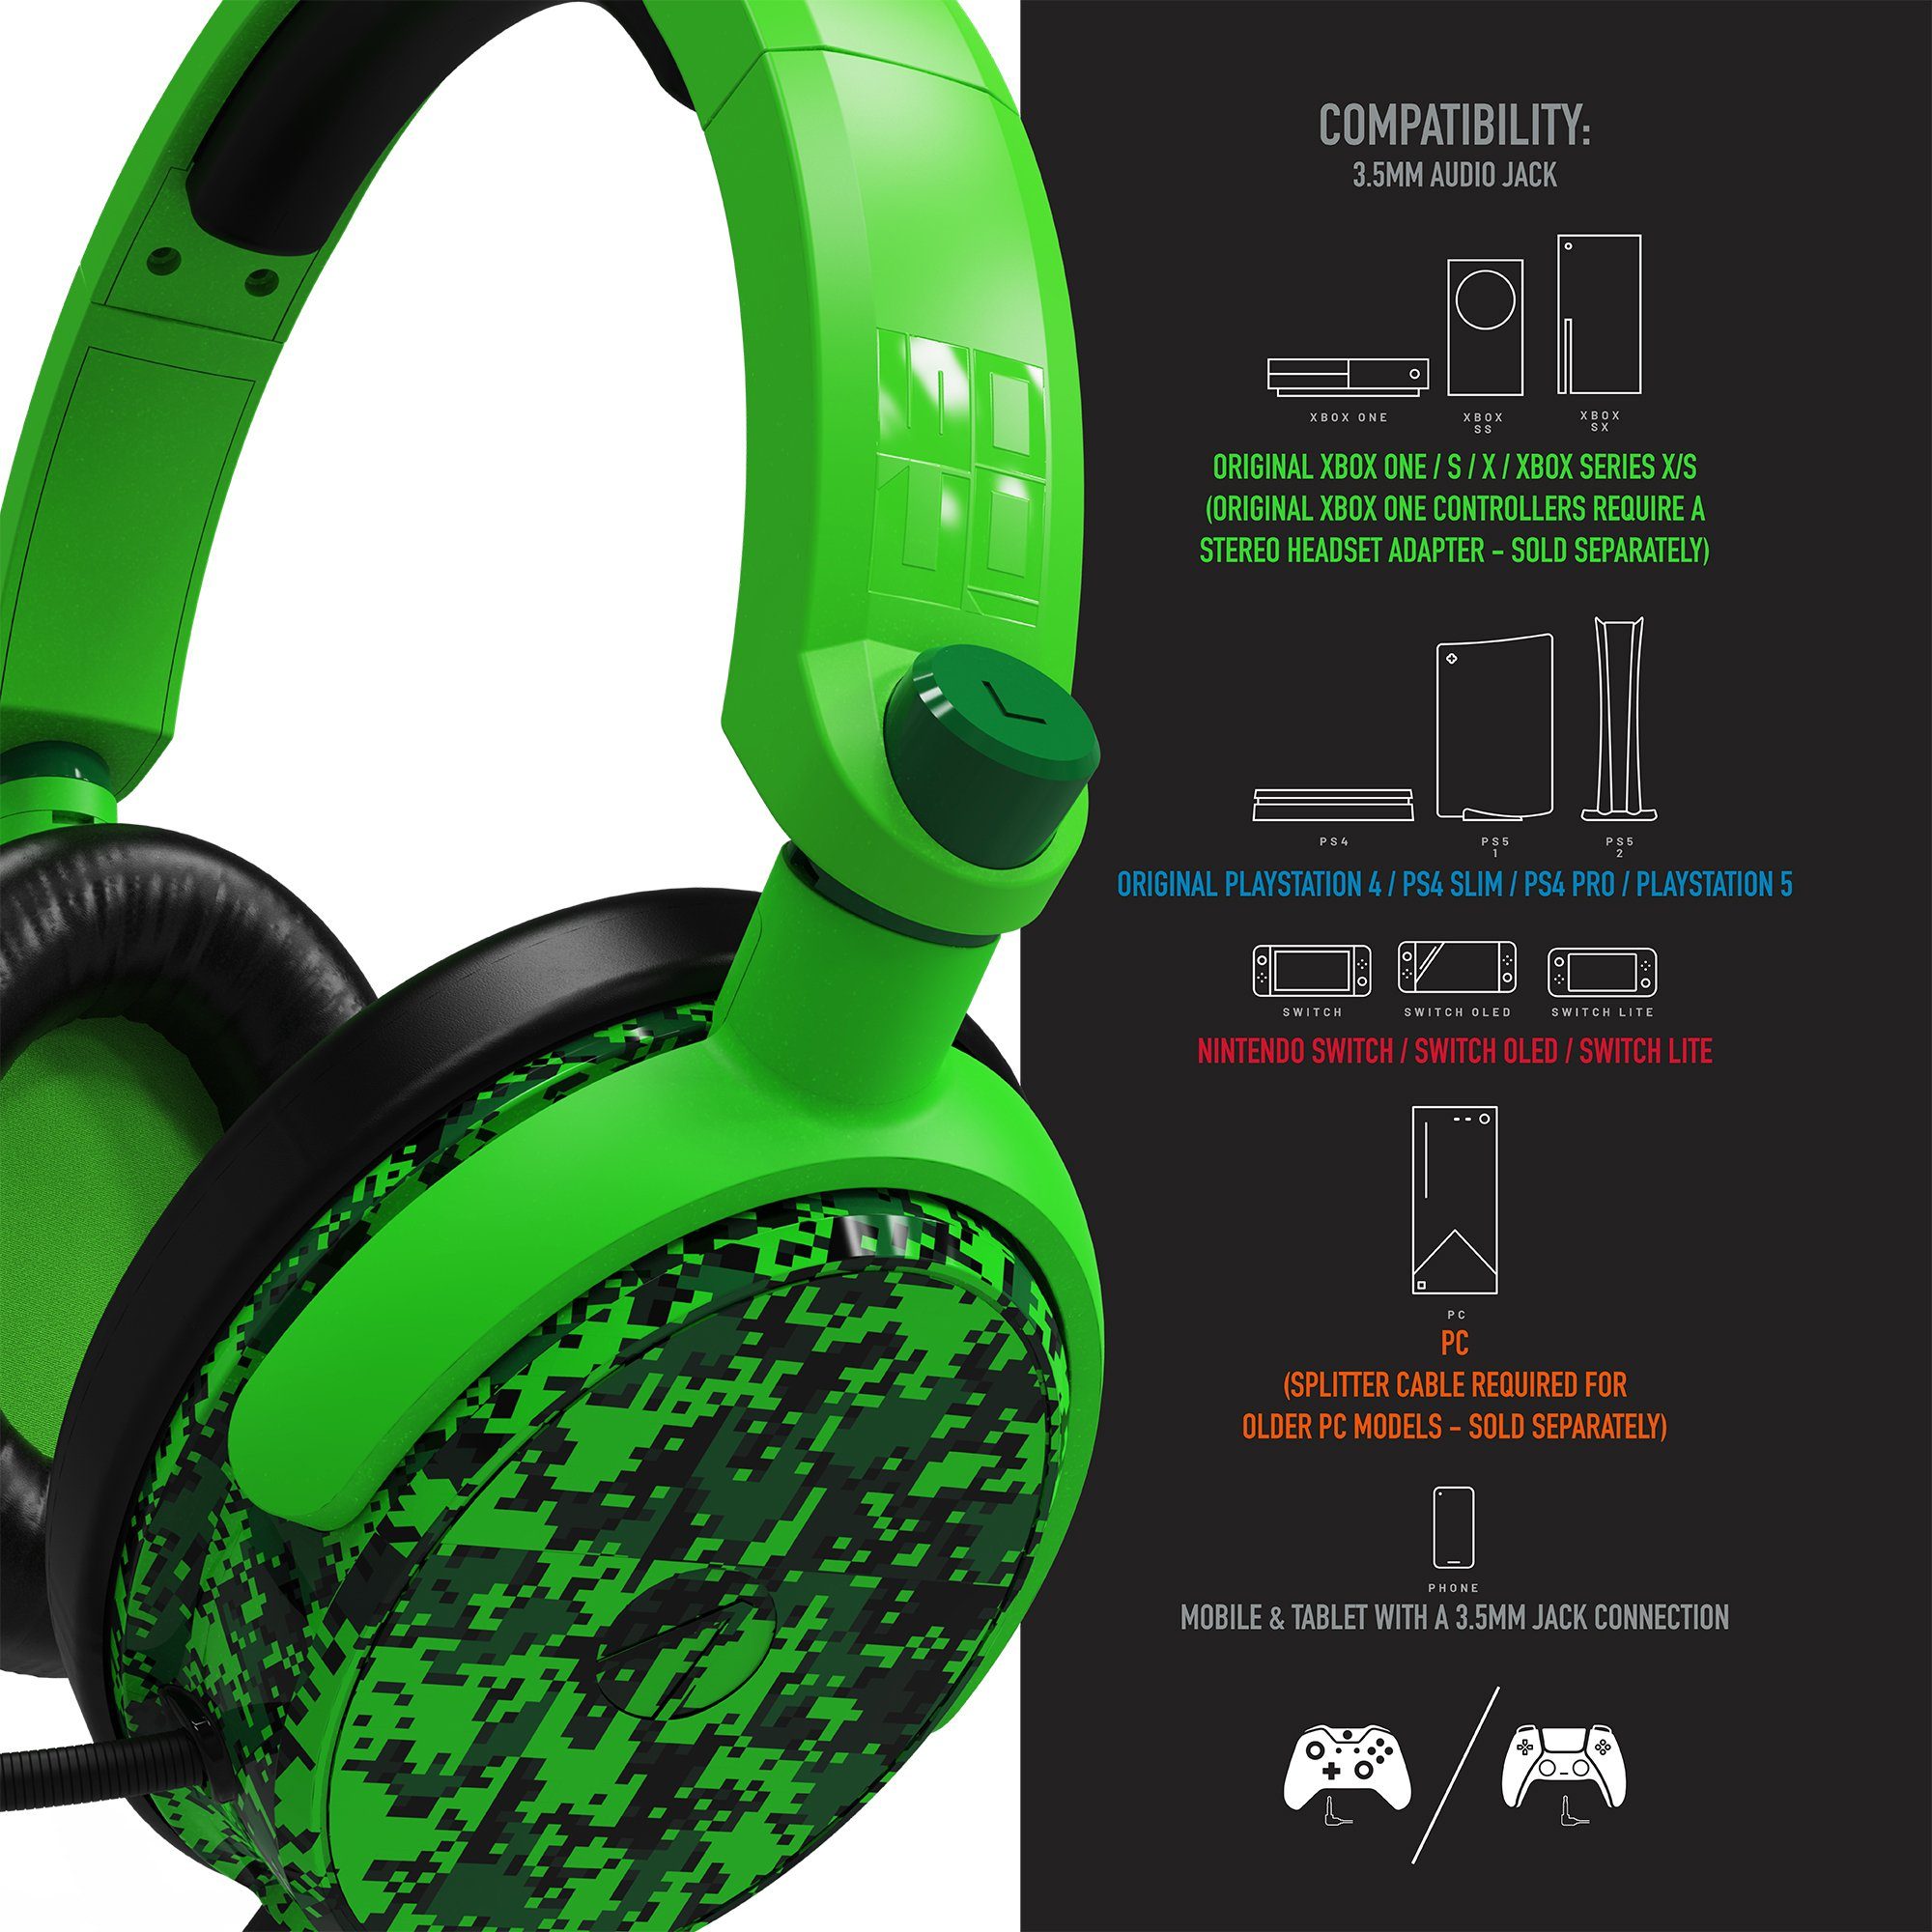 Stealth Multiformat Gaming Headset Gaming-Headset C6-100 Camo grün camouflage